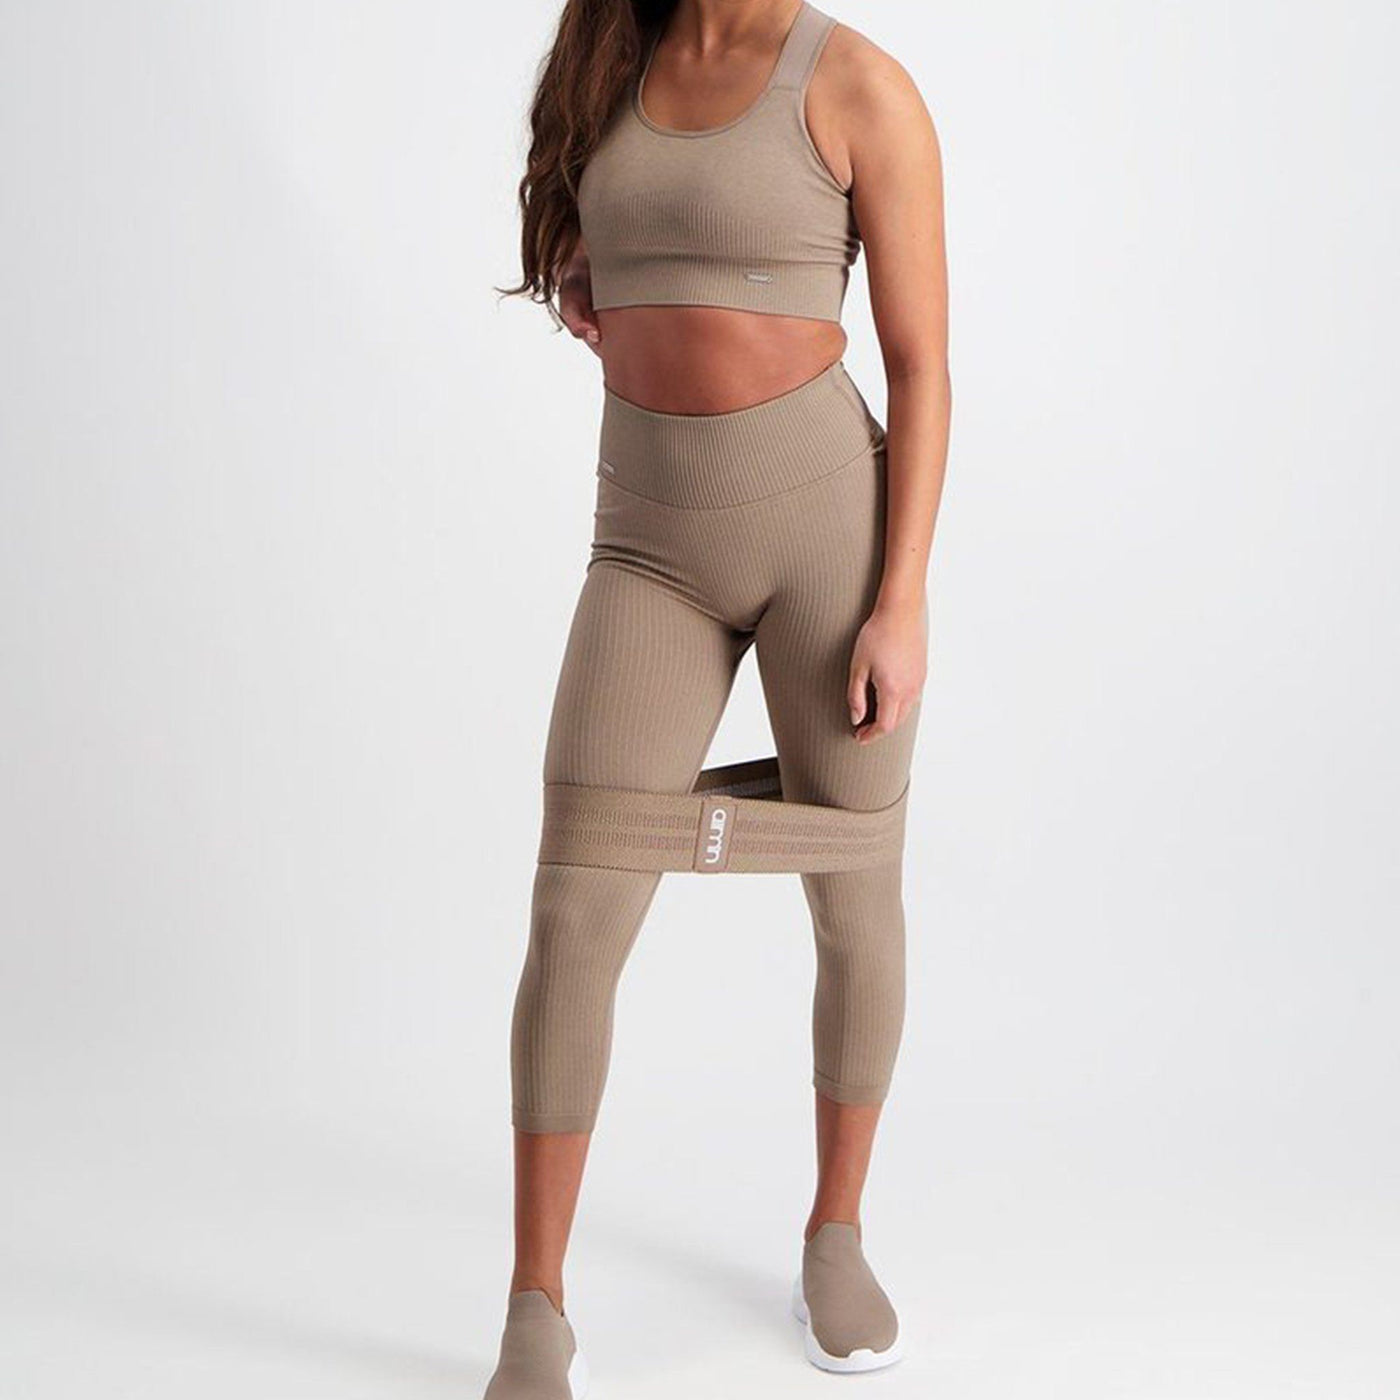 Gym clothing for women